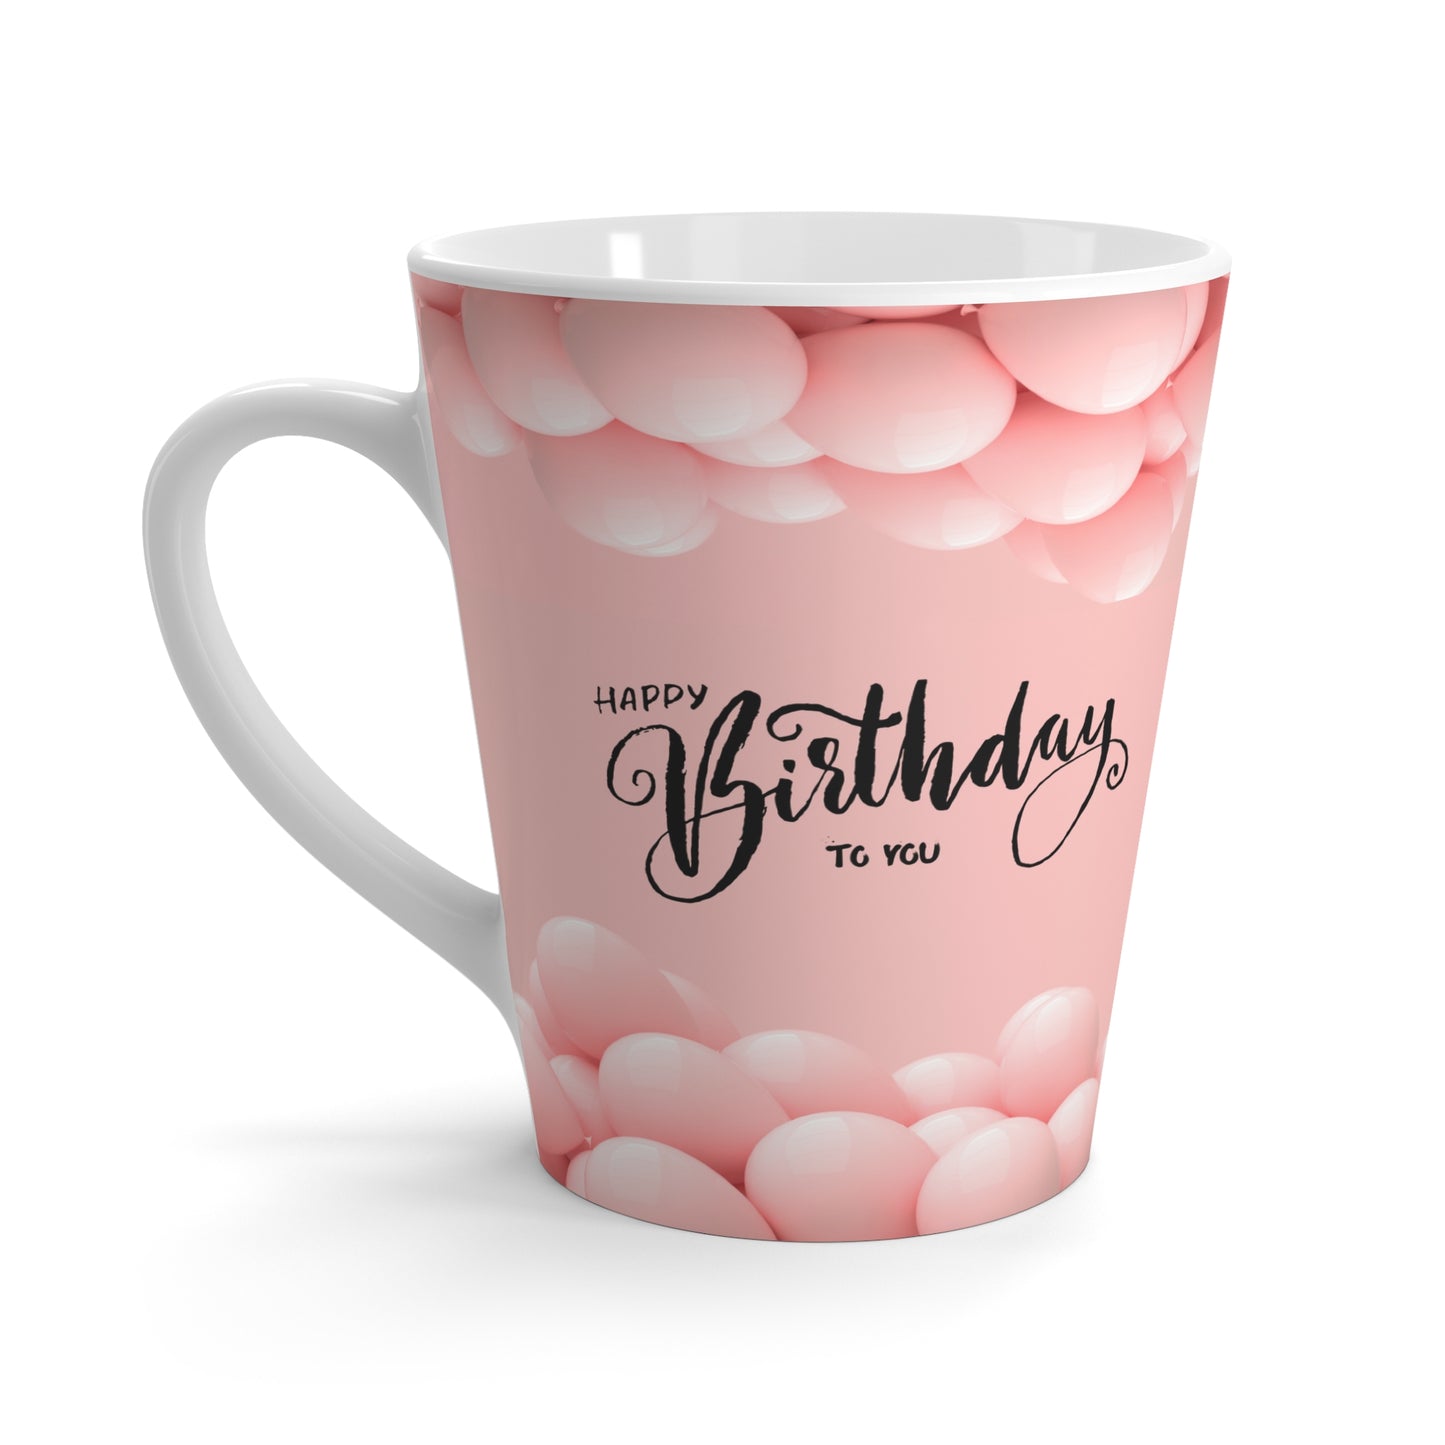 Happy Birthday To You Mugs for Her, Pink